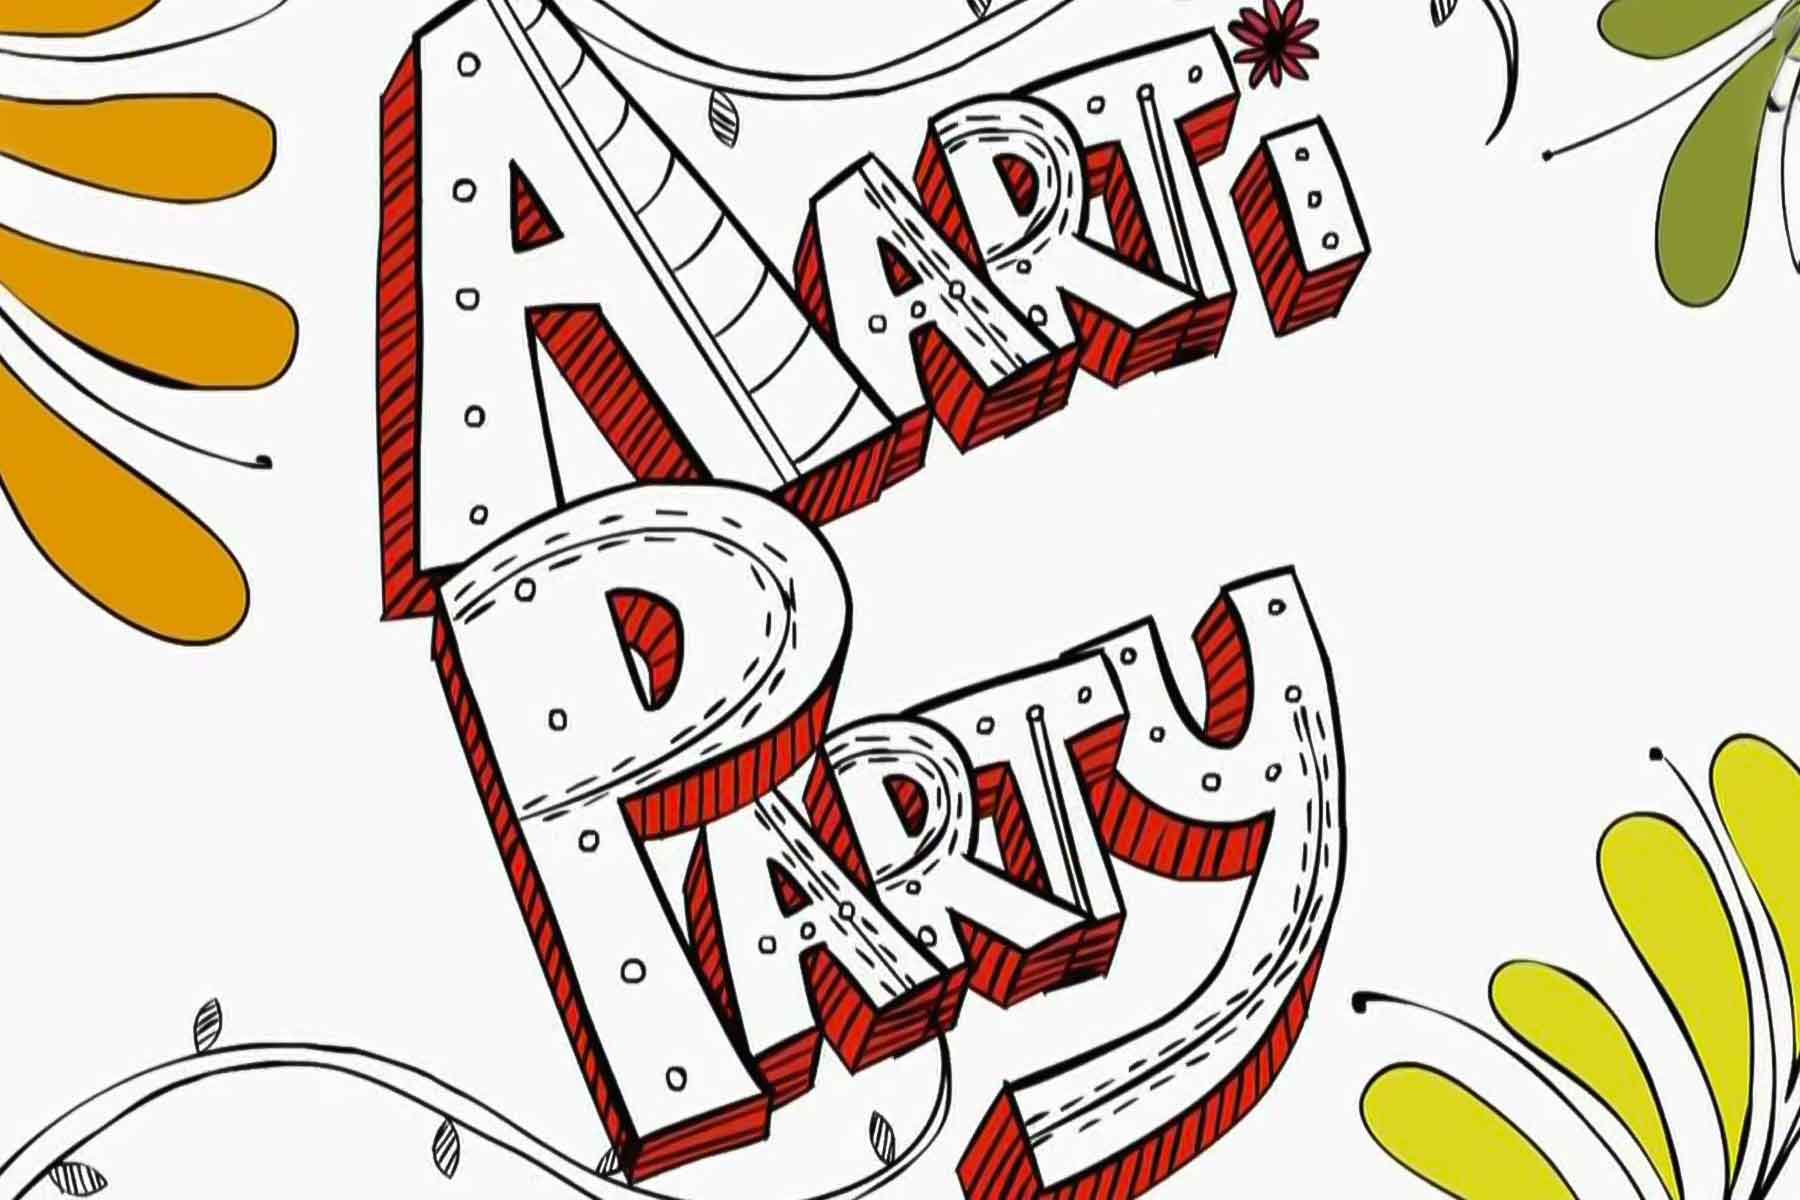 An illustration with block letters that spell out 'Aarti Party'.